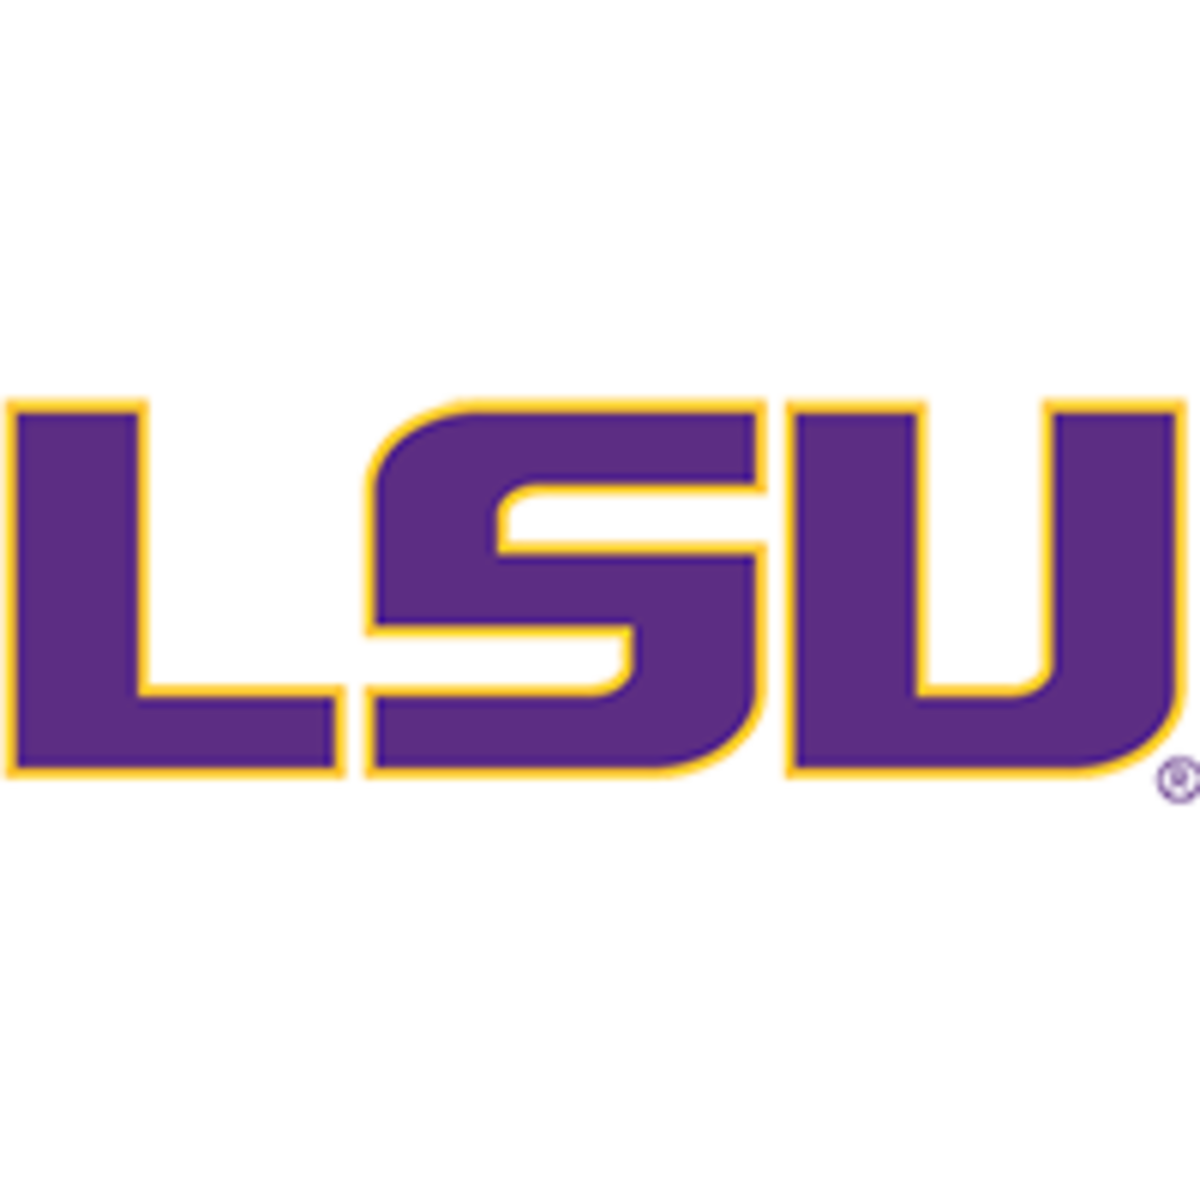 Lsu Schedule Football 2022 Lsu Football Schedule 2022 - Athlonsports.com | Expert Predictions, Picks,  And Previews